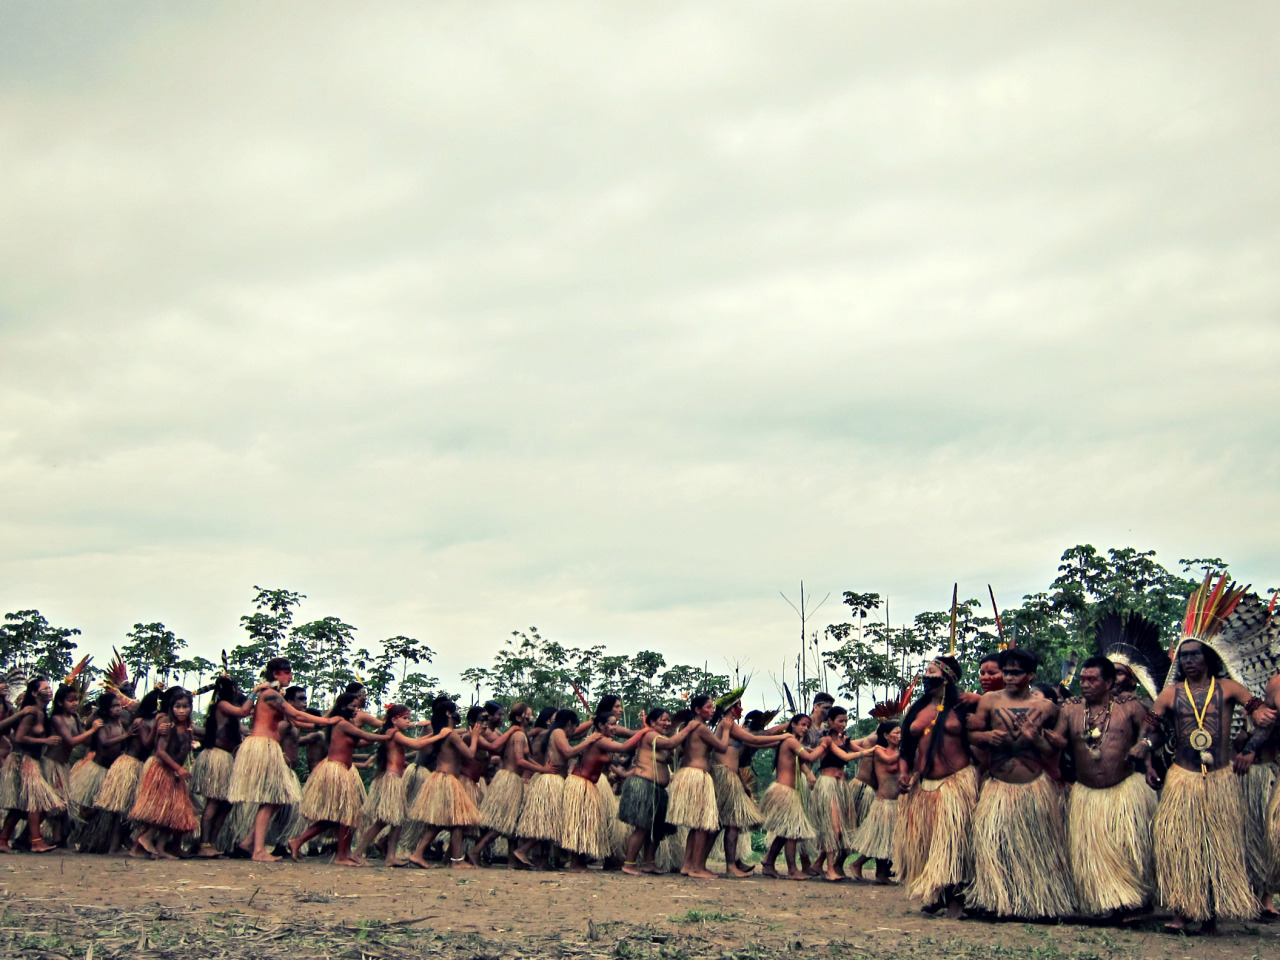 Via Walk in BeautyEvery year for five days, the Yawanawá people open their home